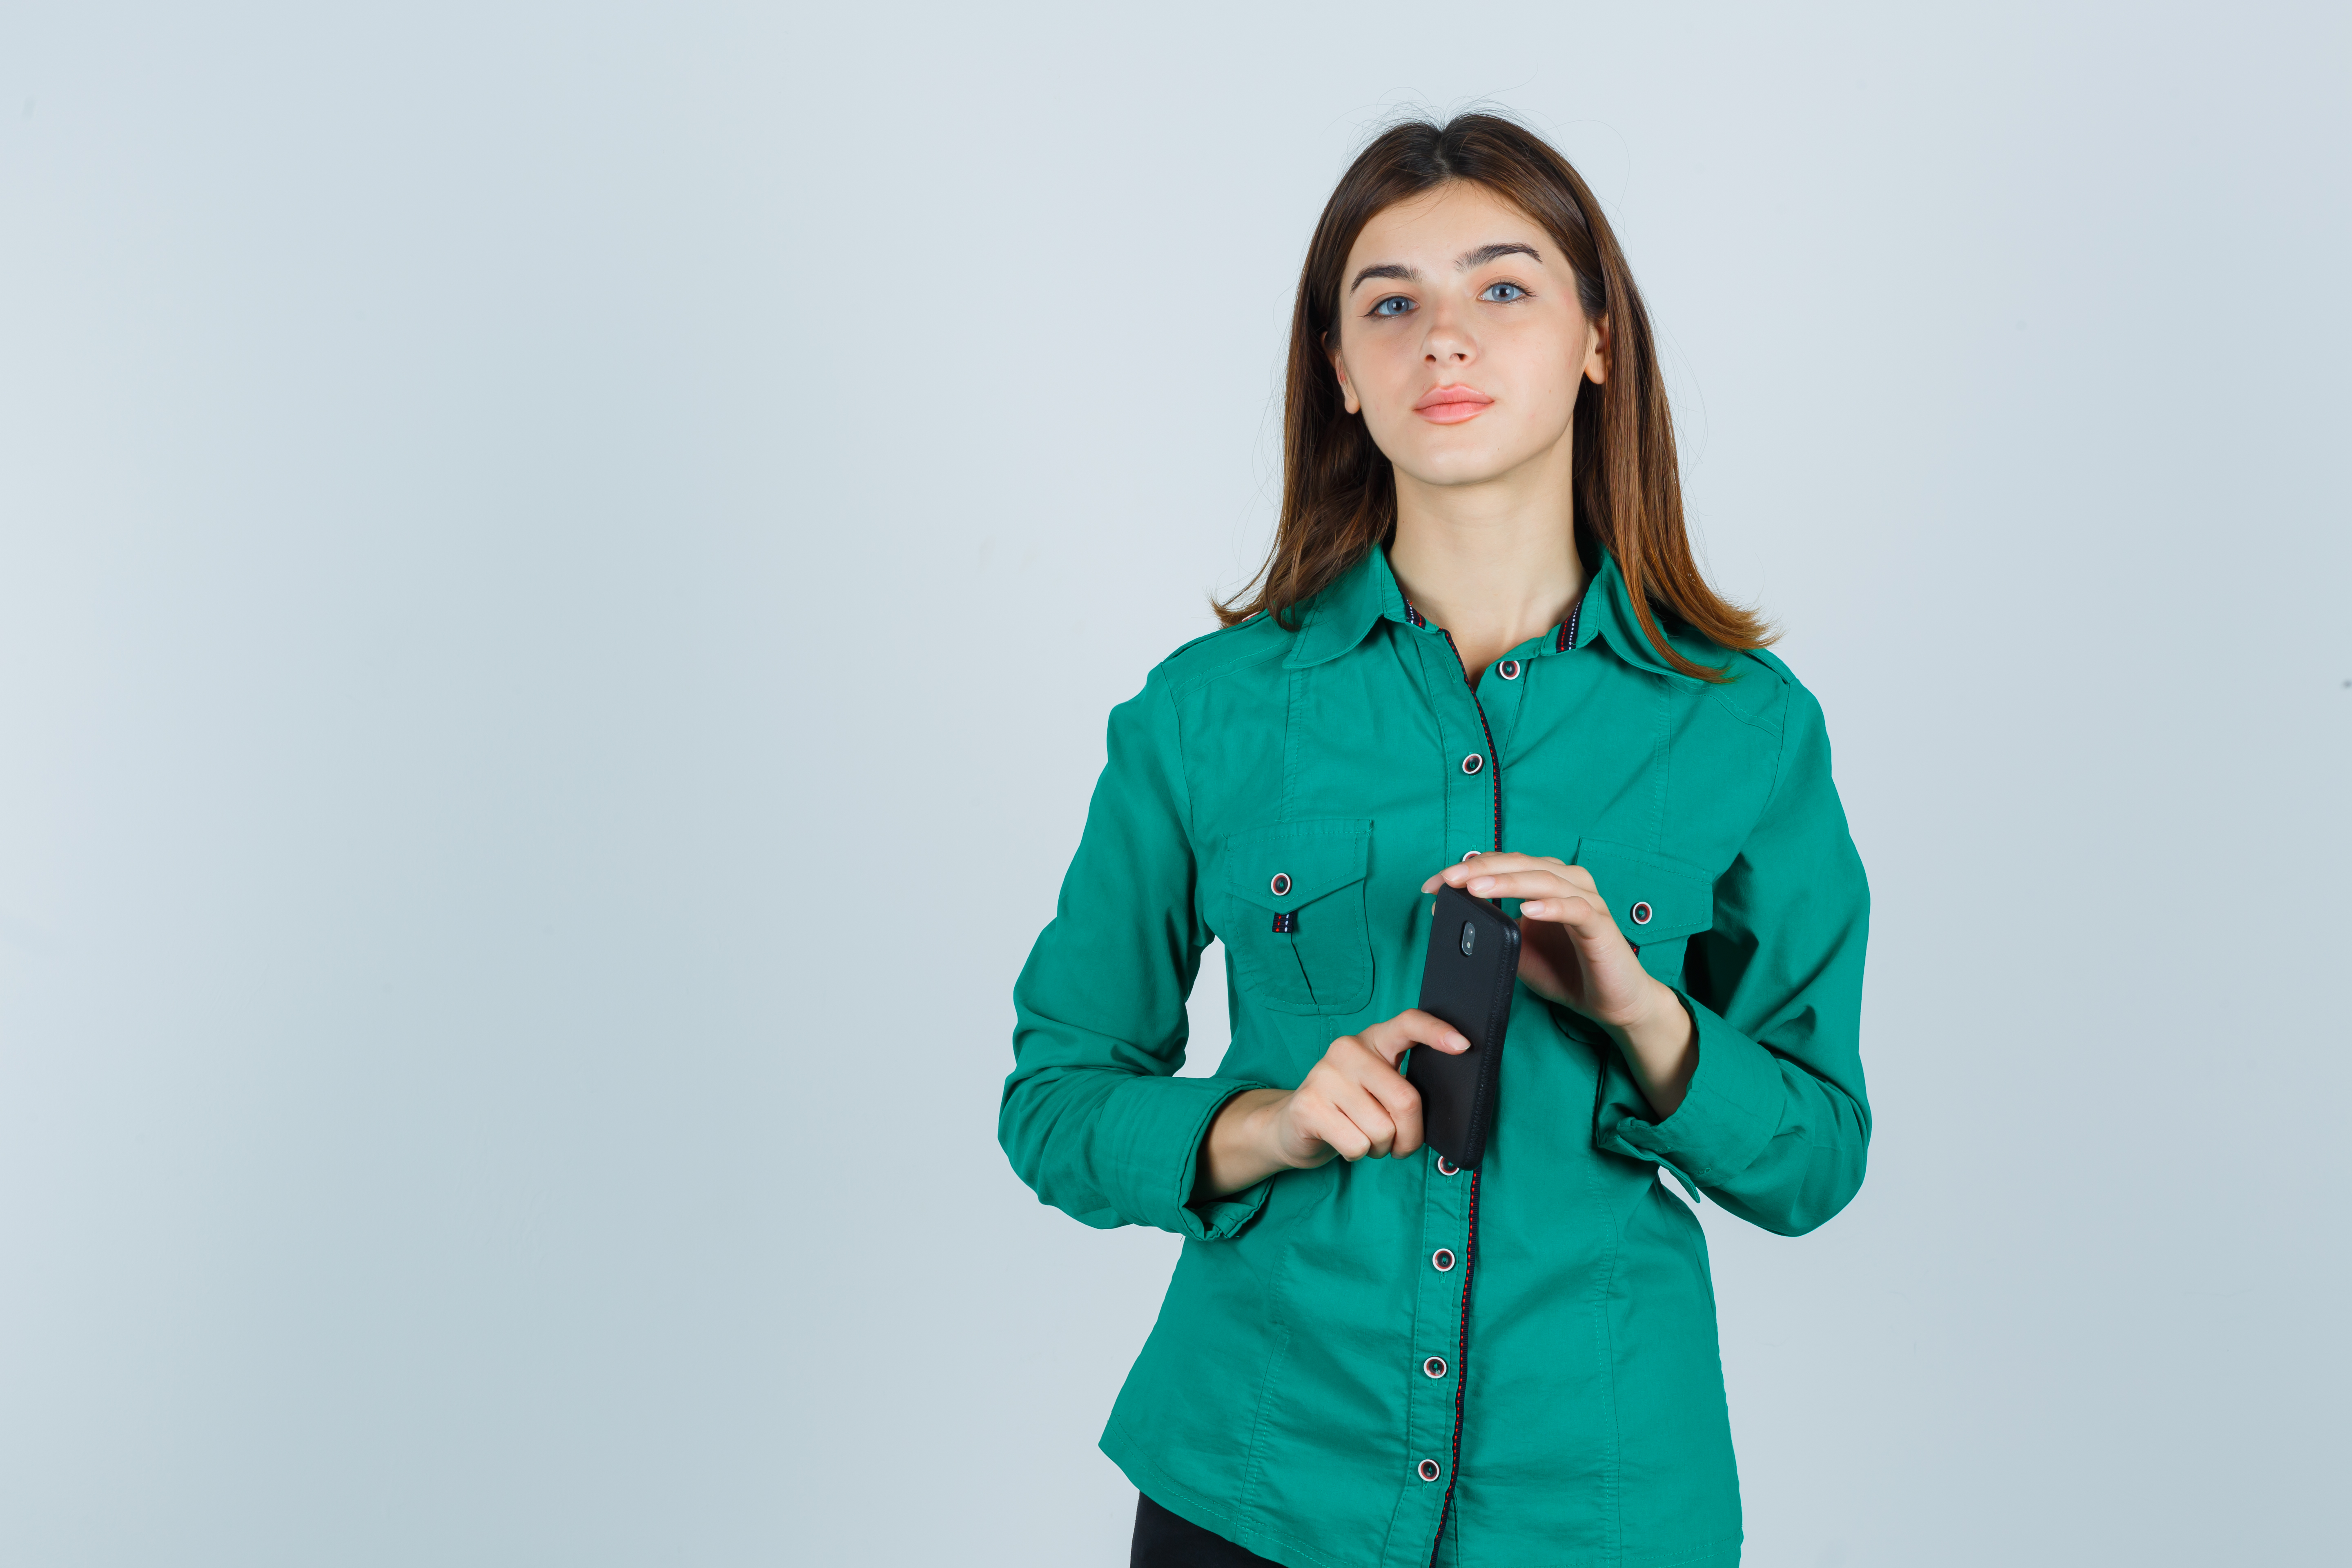 young lady holding mobile phone in green shirt and looking sensible. front view.